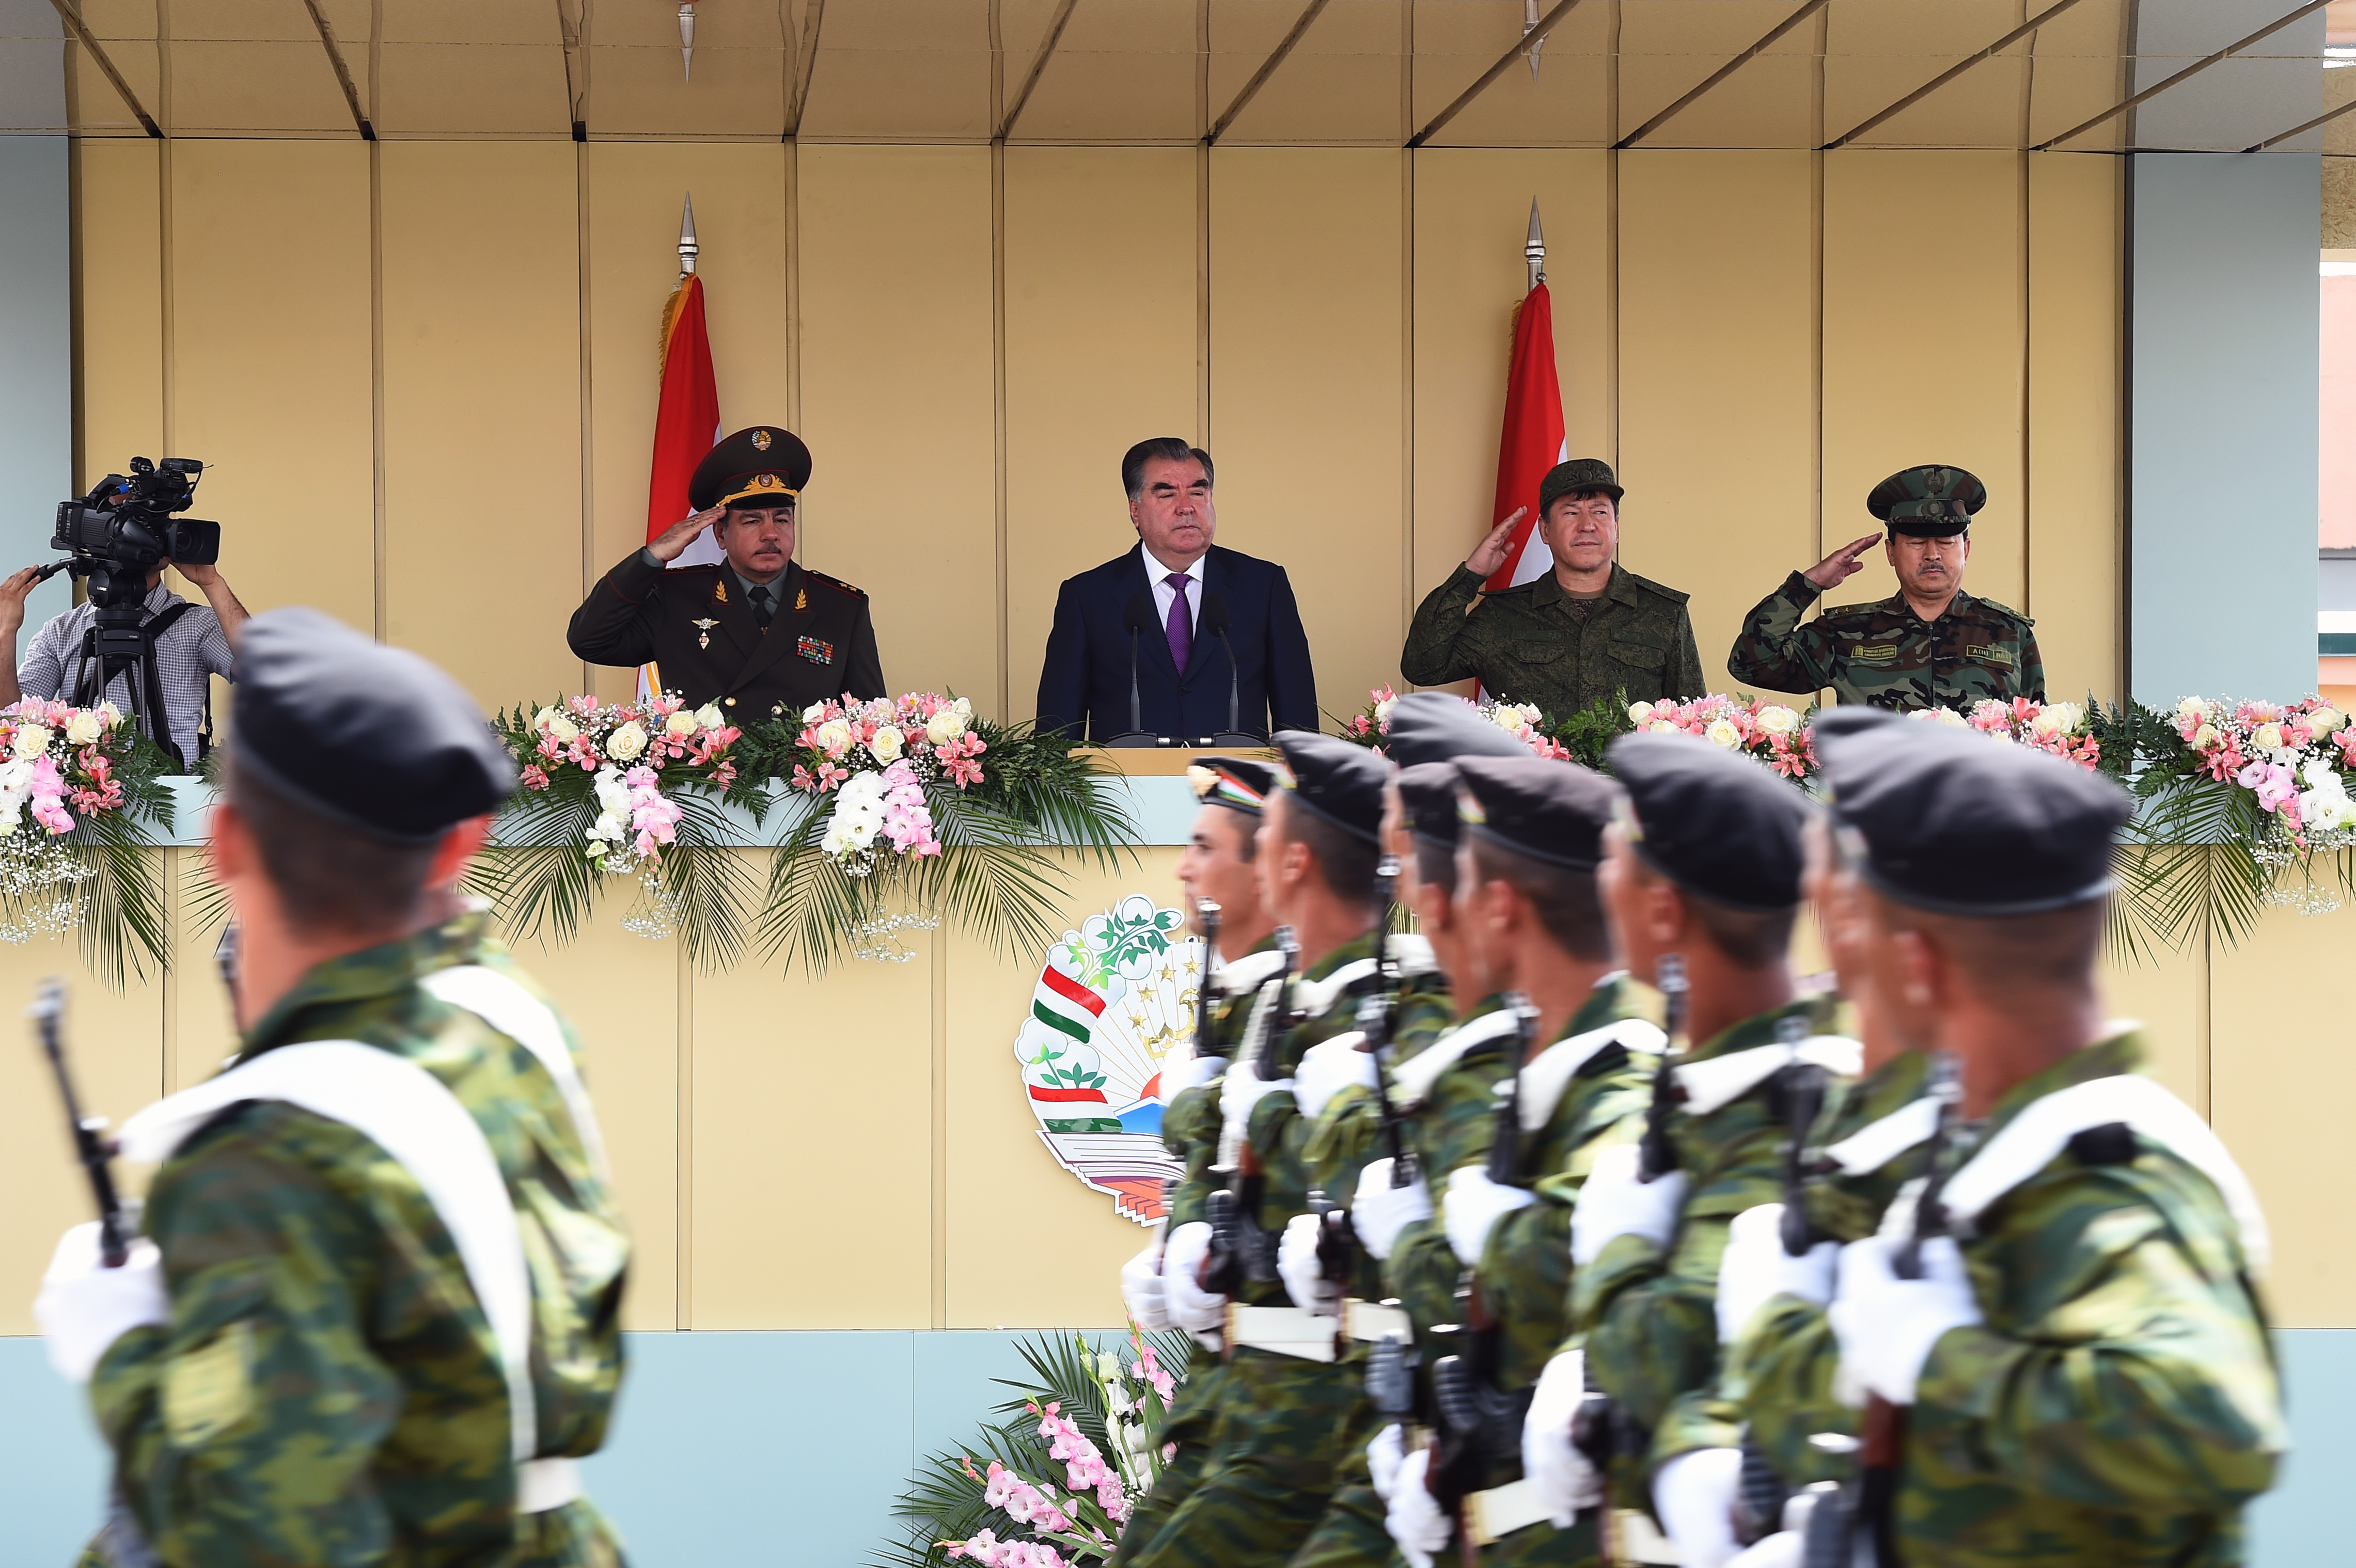 President Rahmon inaugurates a newly-founded special service military brigade (photo credit: Media Services of the President of the Republic of Tajikistan)